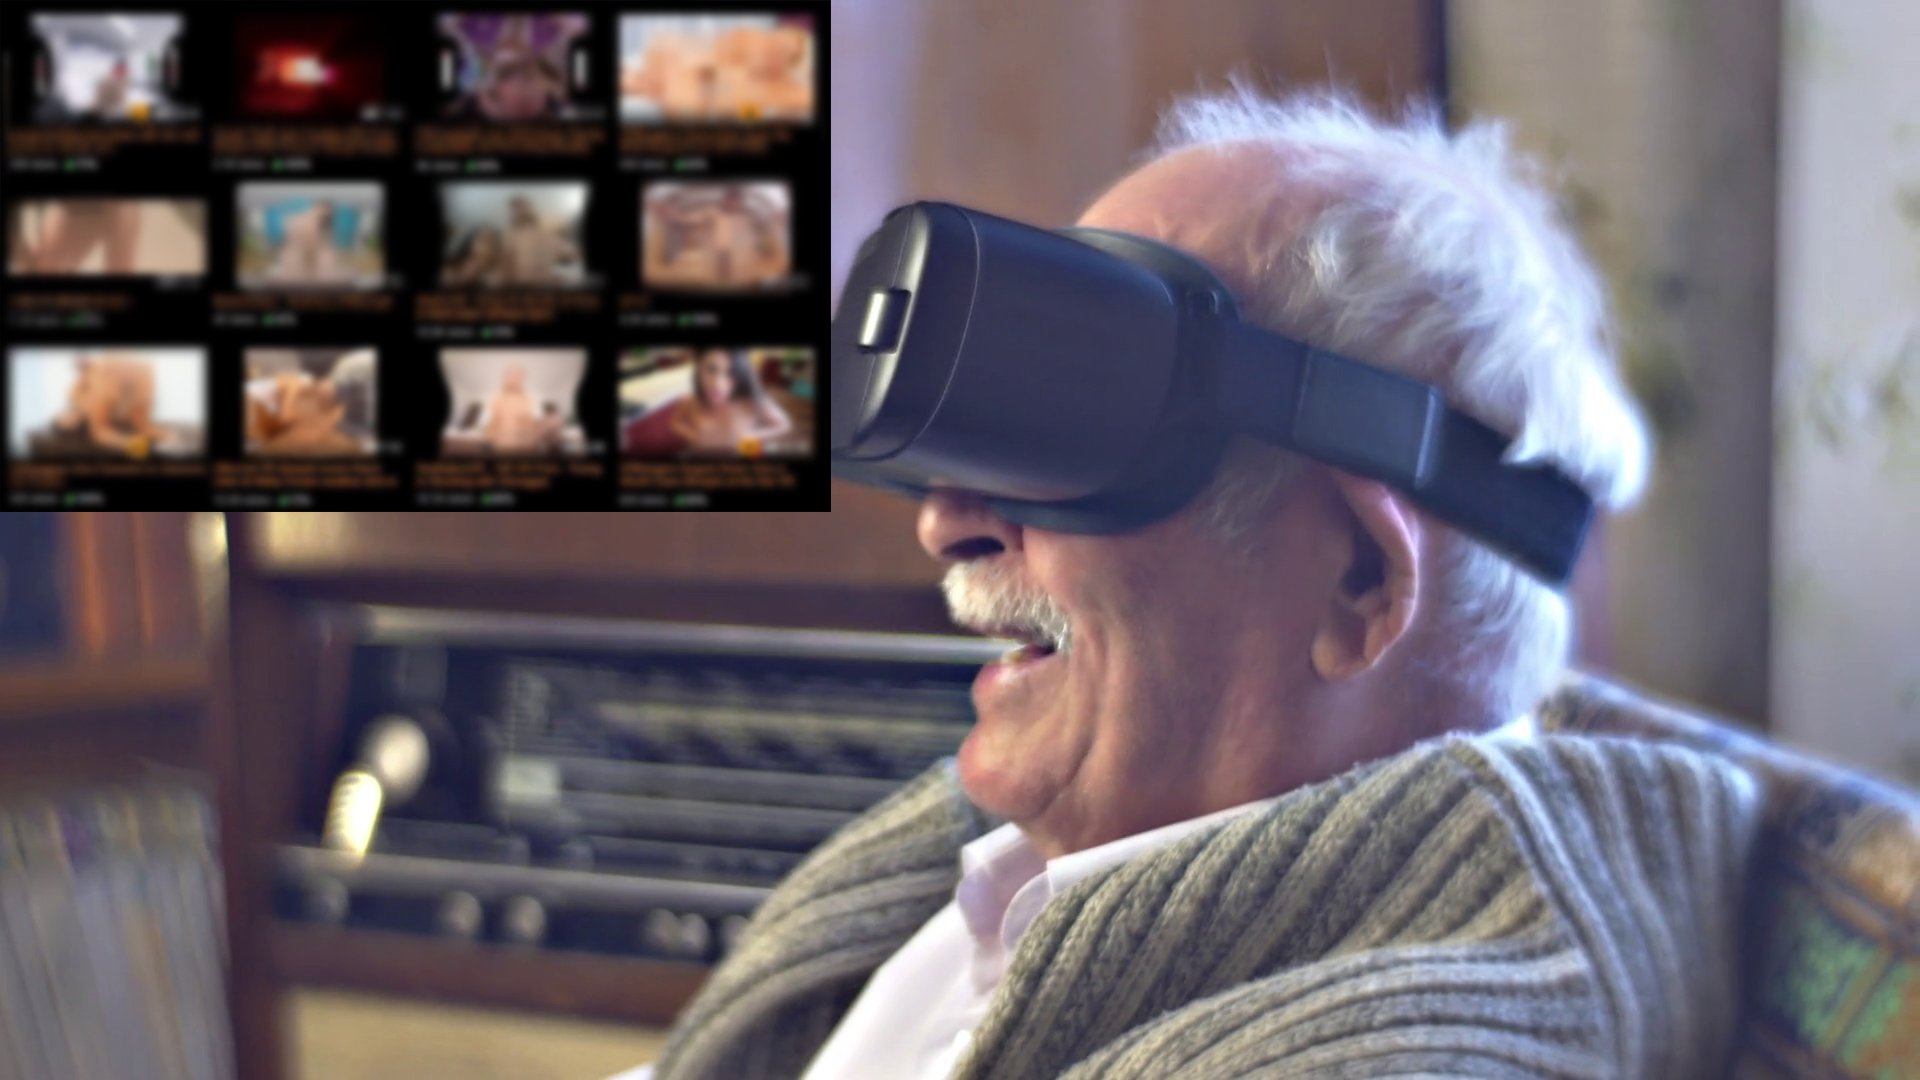 excited grandpa in vr glasses is smiling turning his head and smiling telling what he sees man feels the movie or game real senior man and